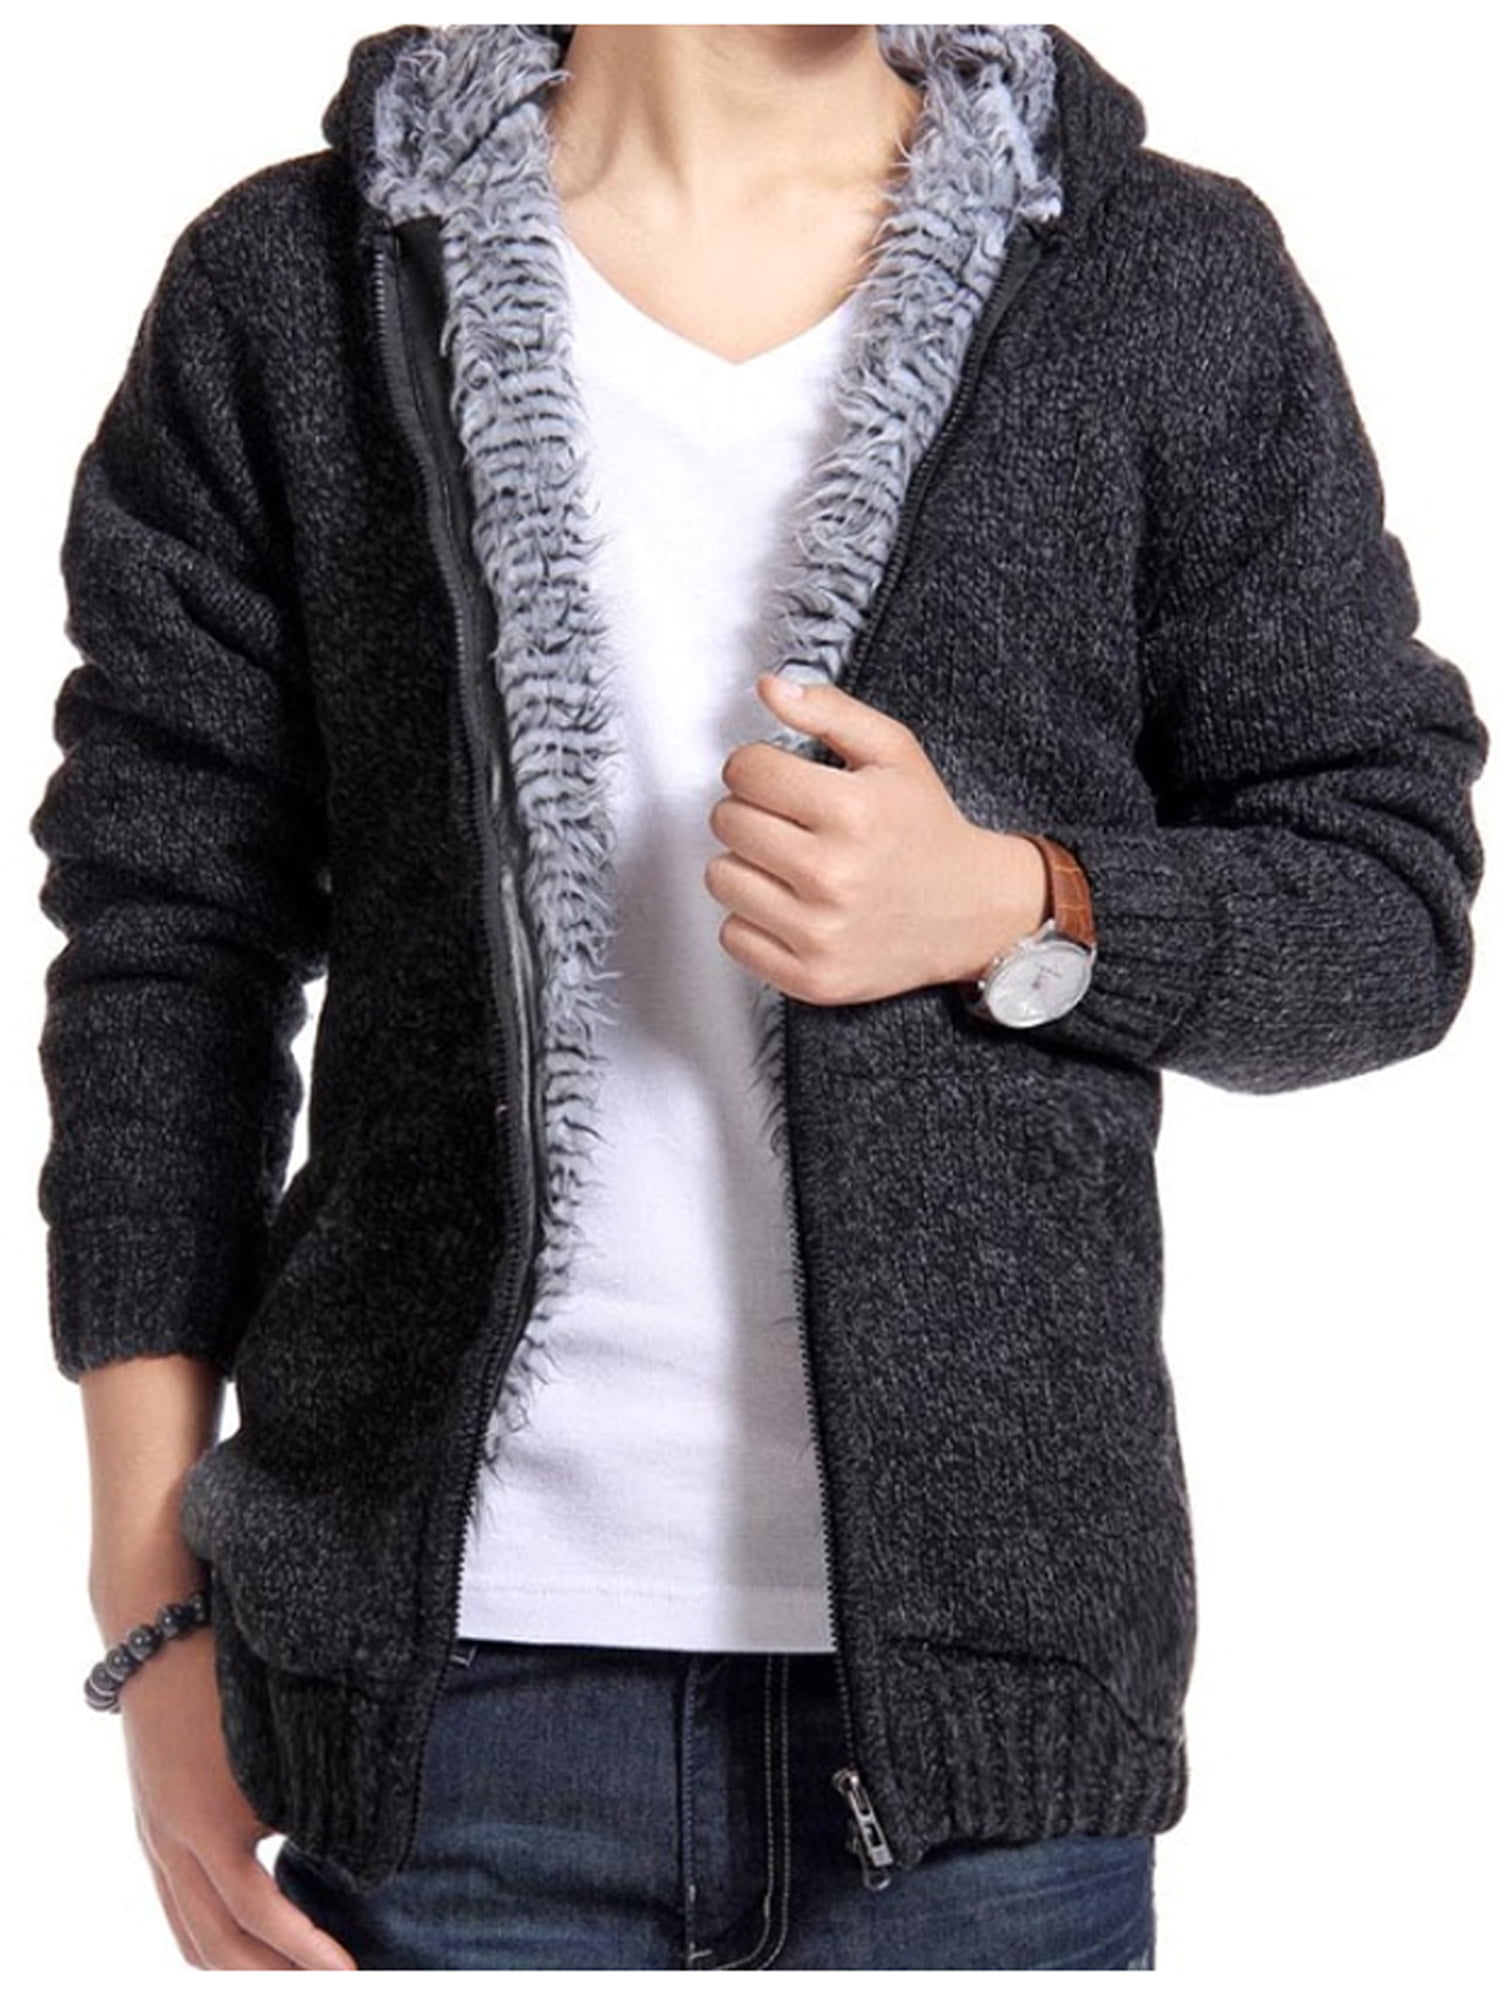 Fashion Slim Fit Men Fur Lined Thicken knitted sweater Knitwear Cardigan Coat